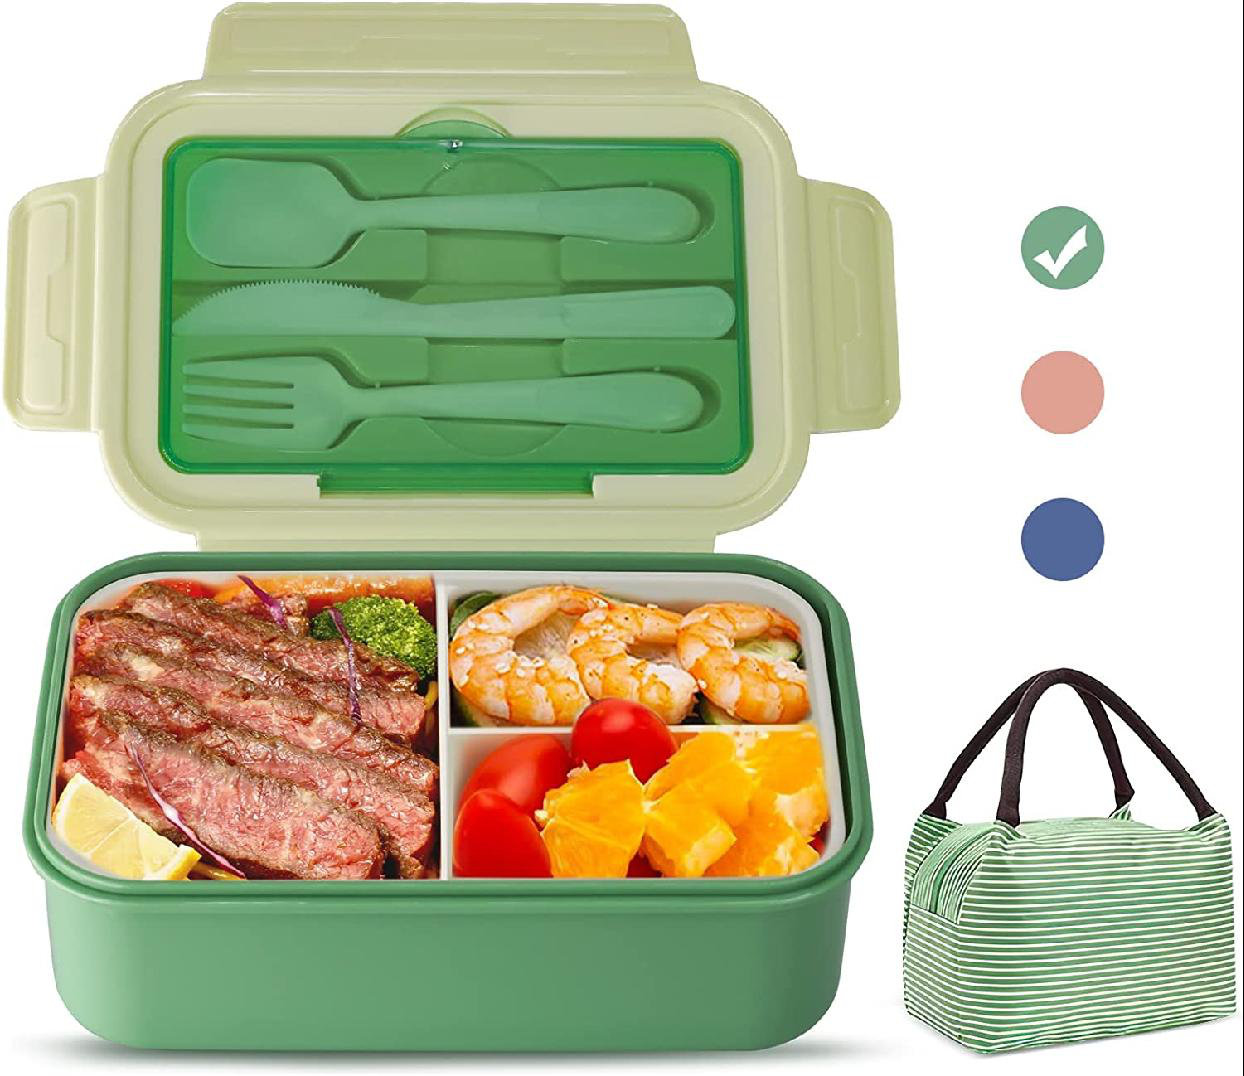 Linoroso All-In-One Stackable Bento Lunch Box & Reviews